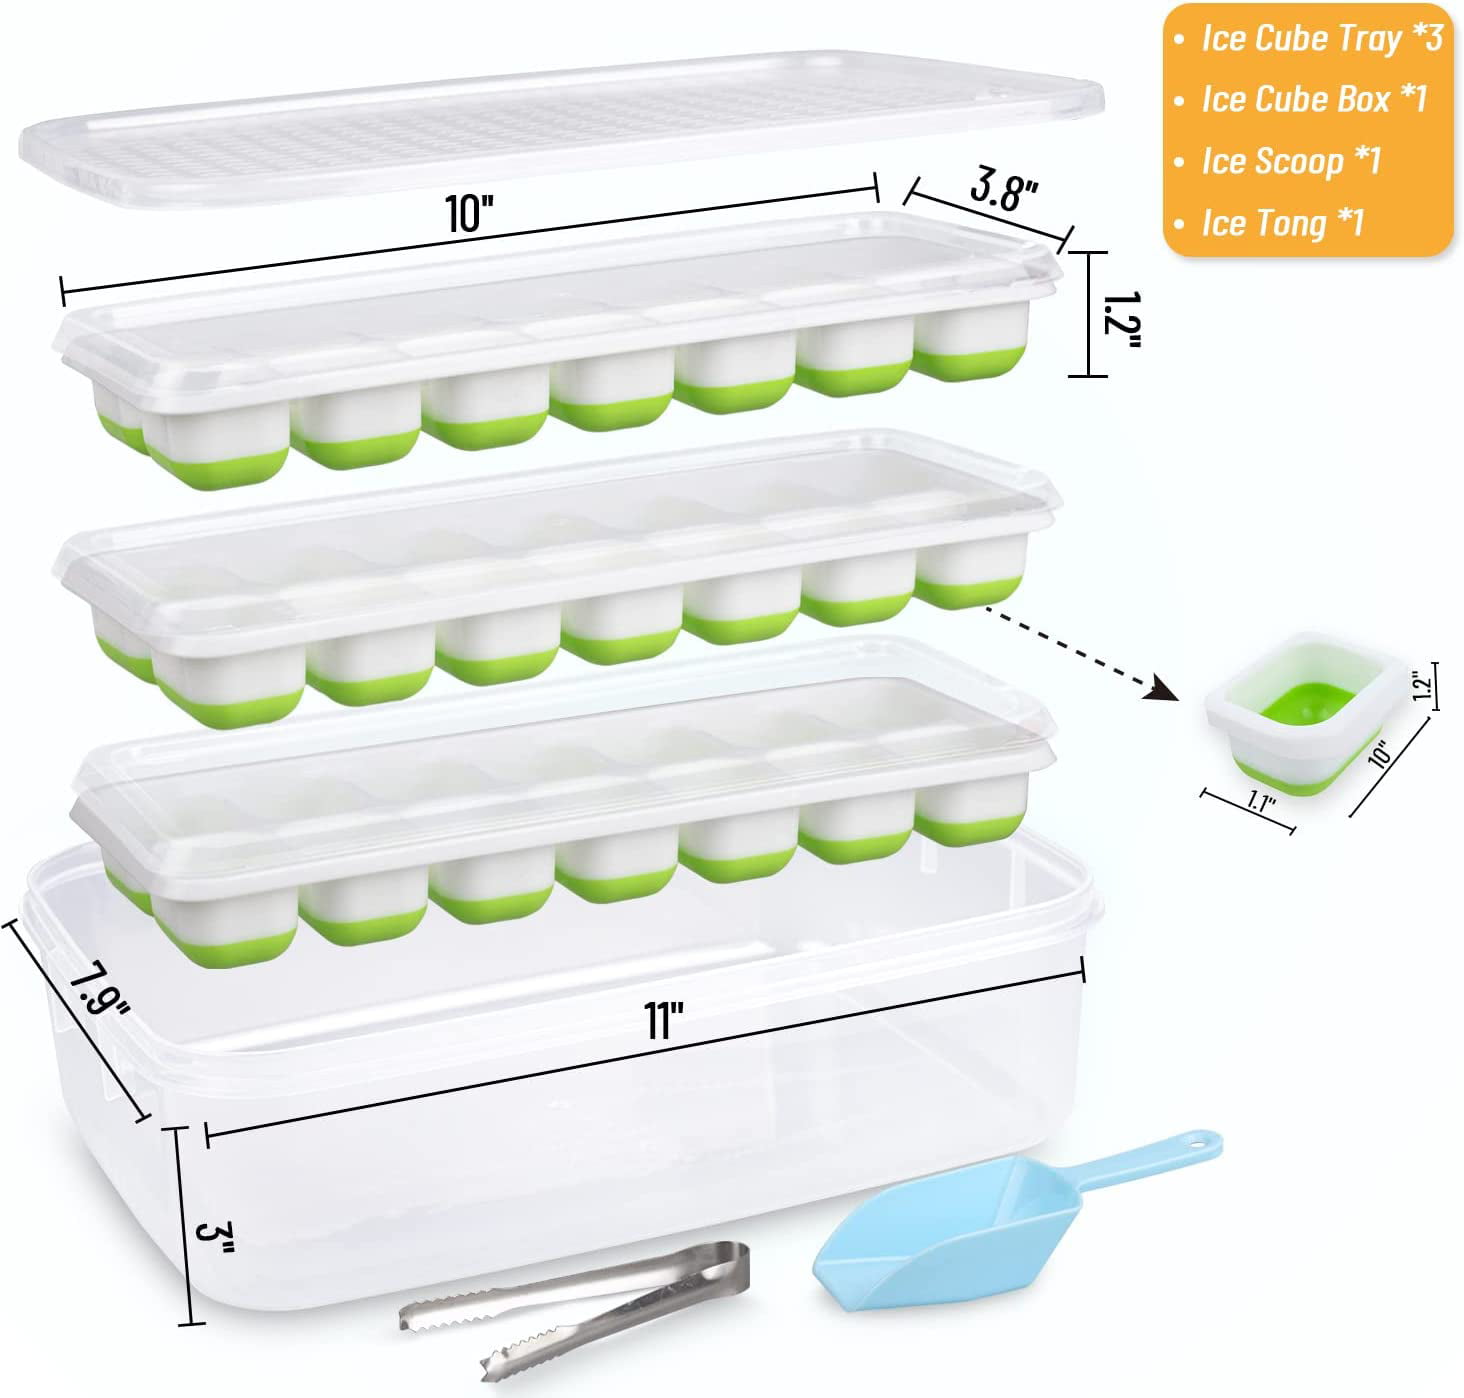 Cbox Cutebox Company White Plastic Tray 14.75 X 8.25 X 1 With 72